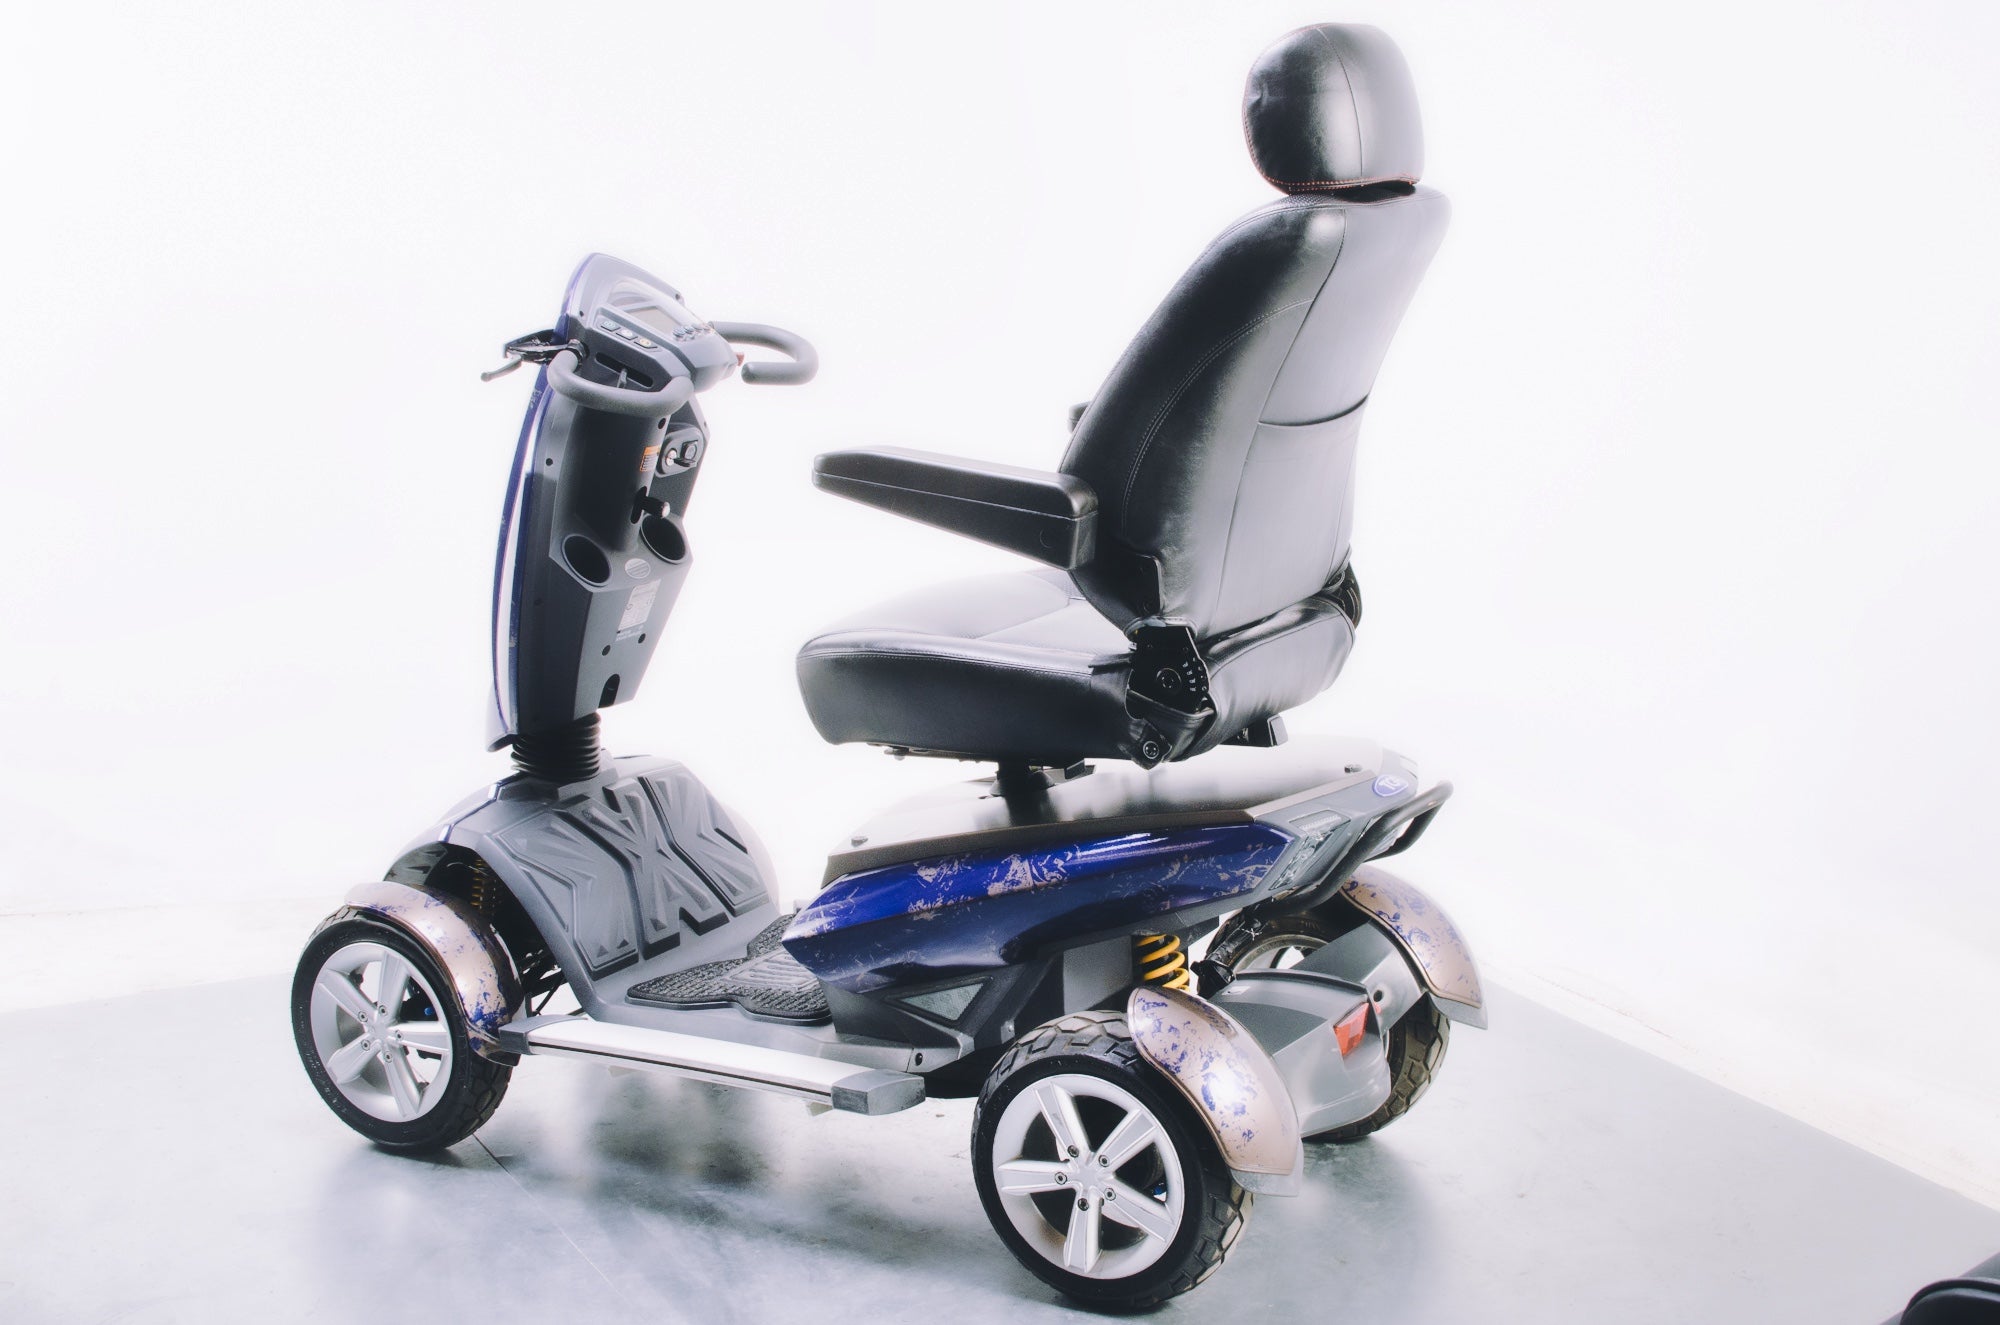 TGA Vita Used Electric Mobility Scooter 8mph Bucket Seat